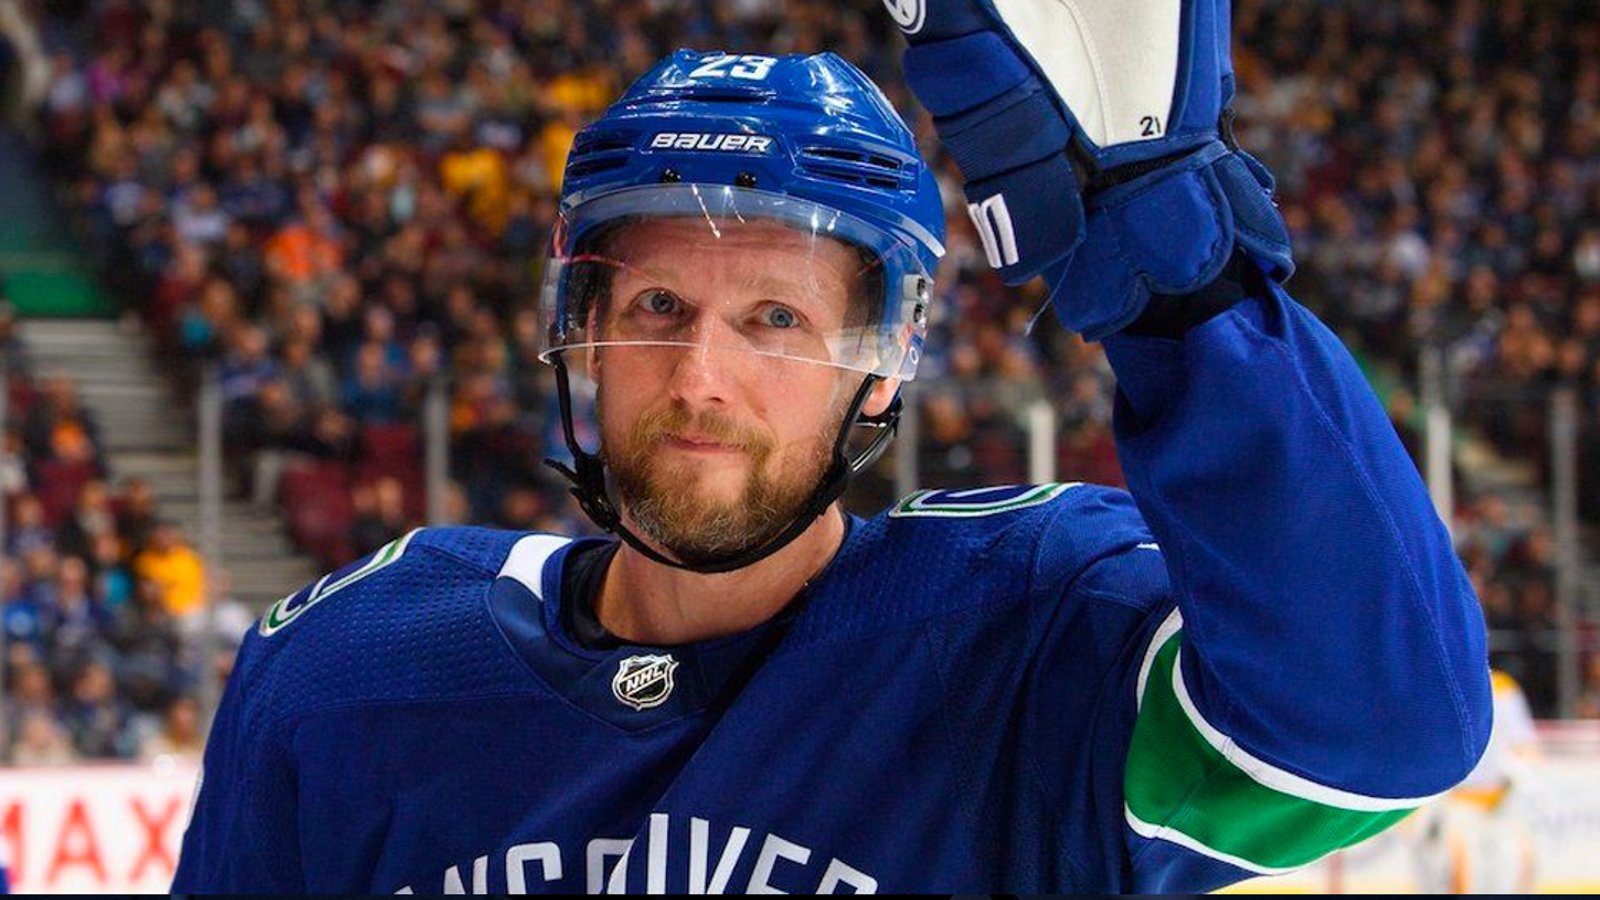 Breaking: Edler officially takes himself off the free agent market